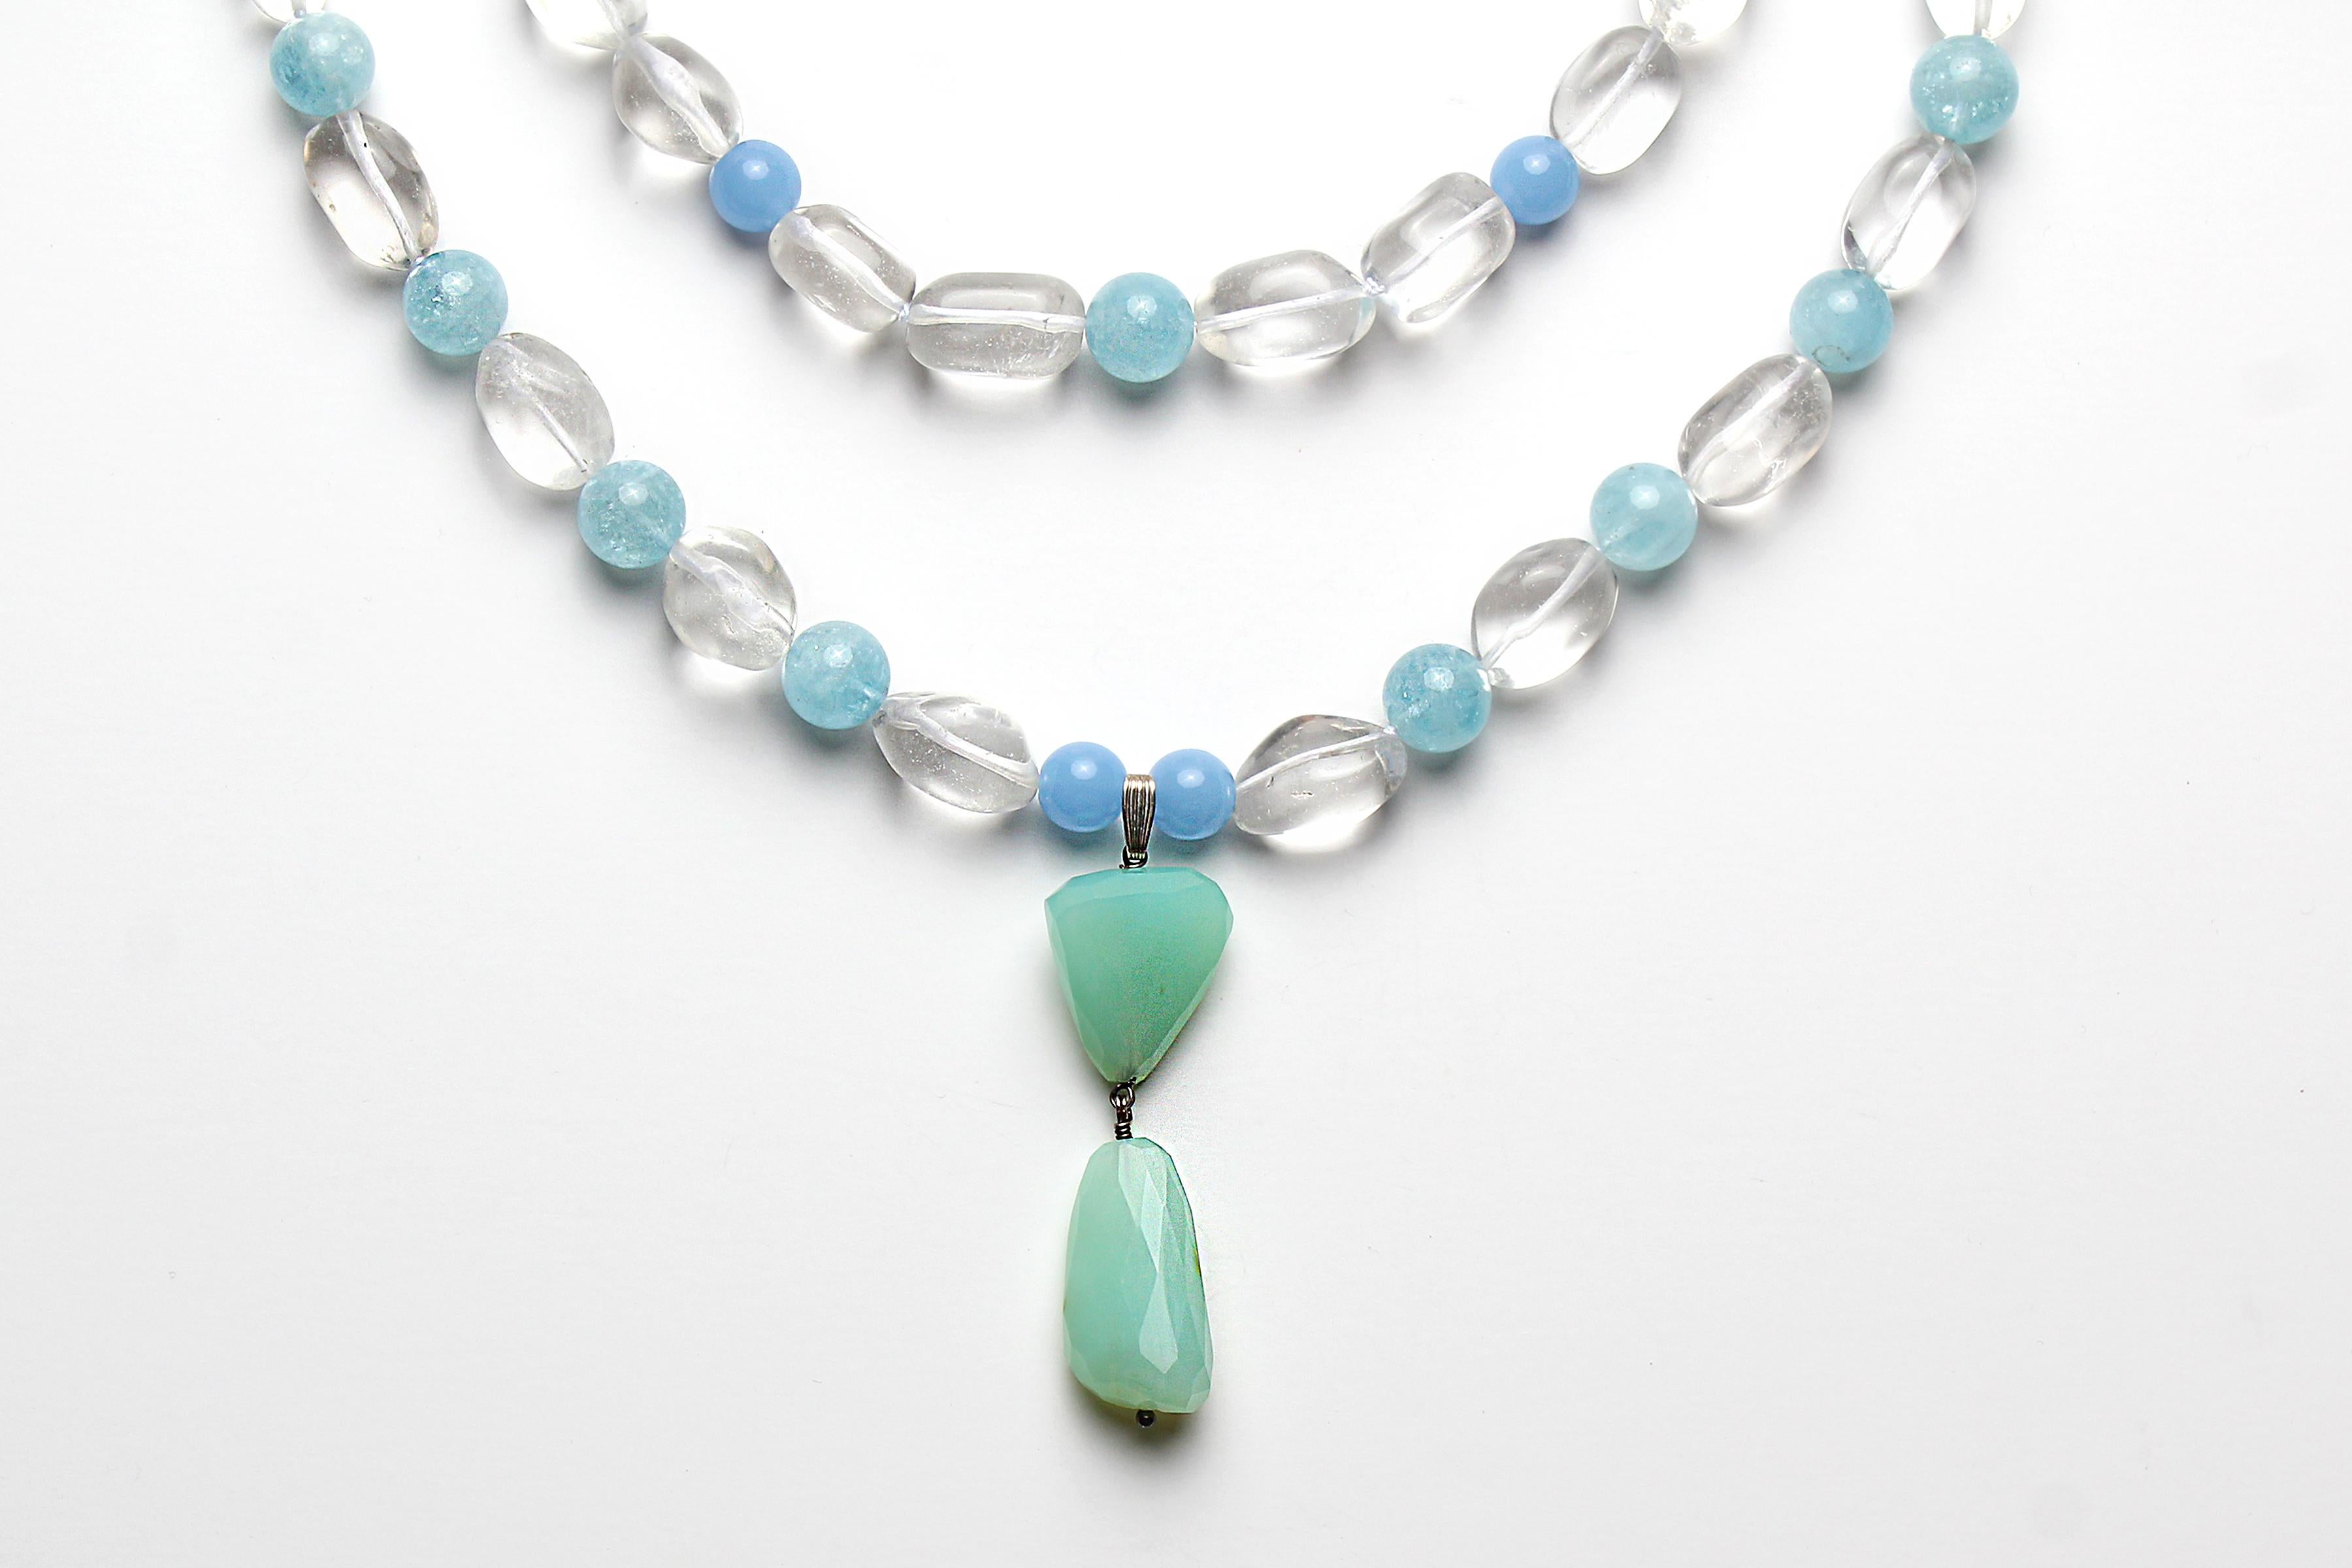 Double Strand Beaded Necklace consists of:
- 20 mm clear quartz beads
- white thread 
- 14 mm aquamarine grade AAA+ beads 
- 12-14 mm chalcedony grade AAA+ beads 
- silver clipping at back that connects the two strands
- approximately 18